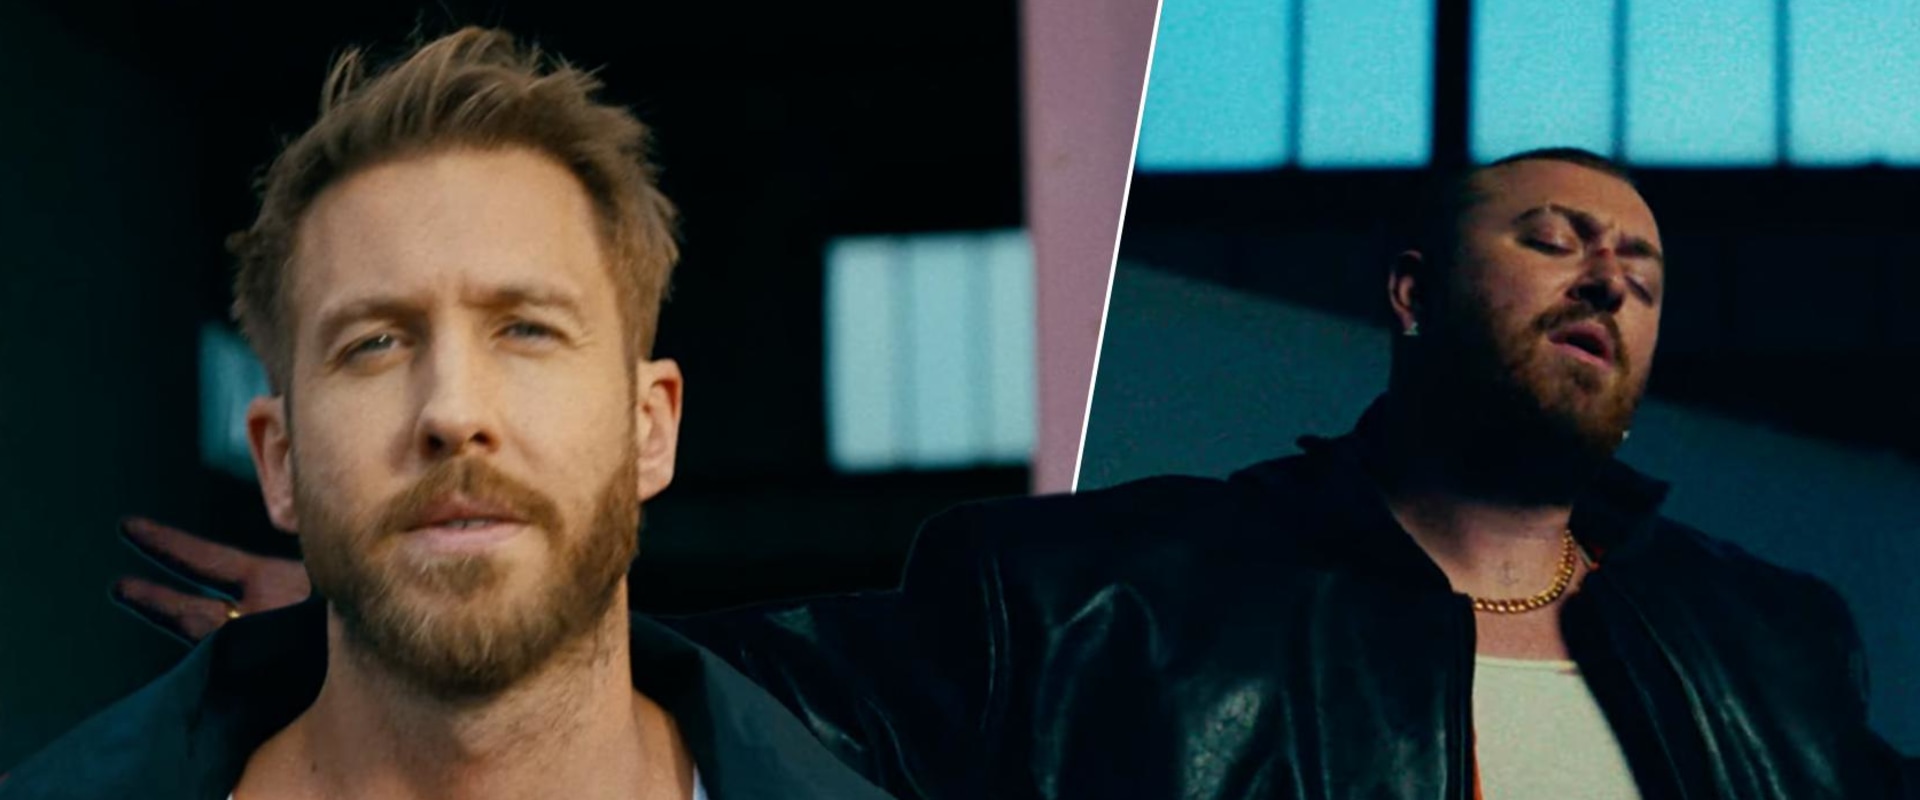 A Deep Dive into Promises by Calvin Harris & Sam Smith